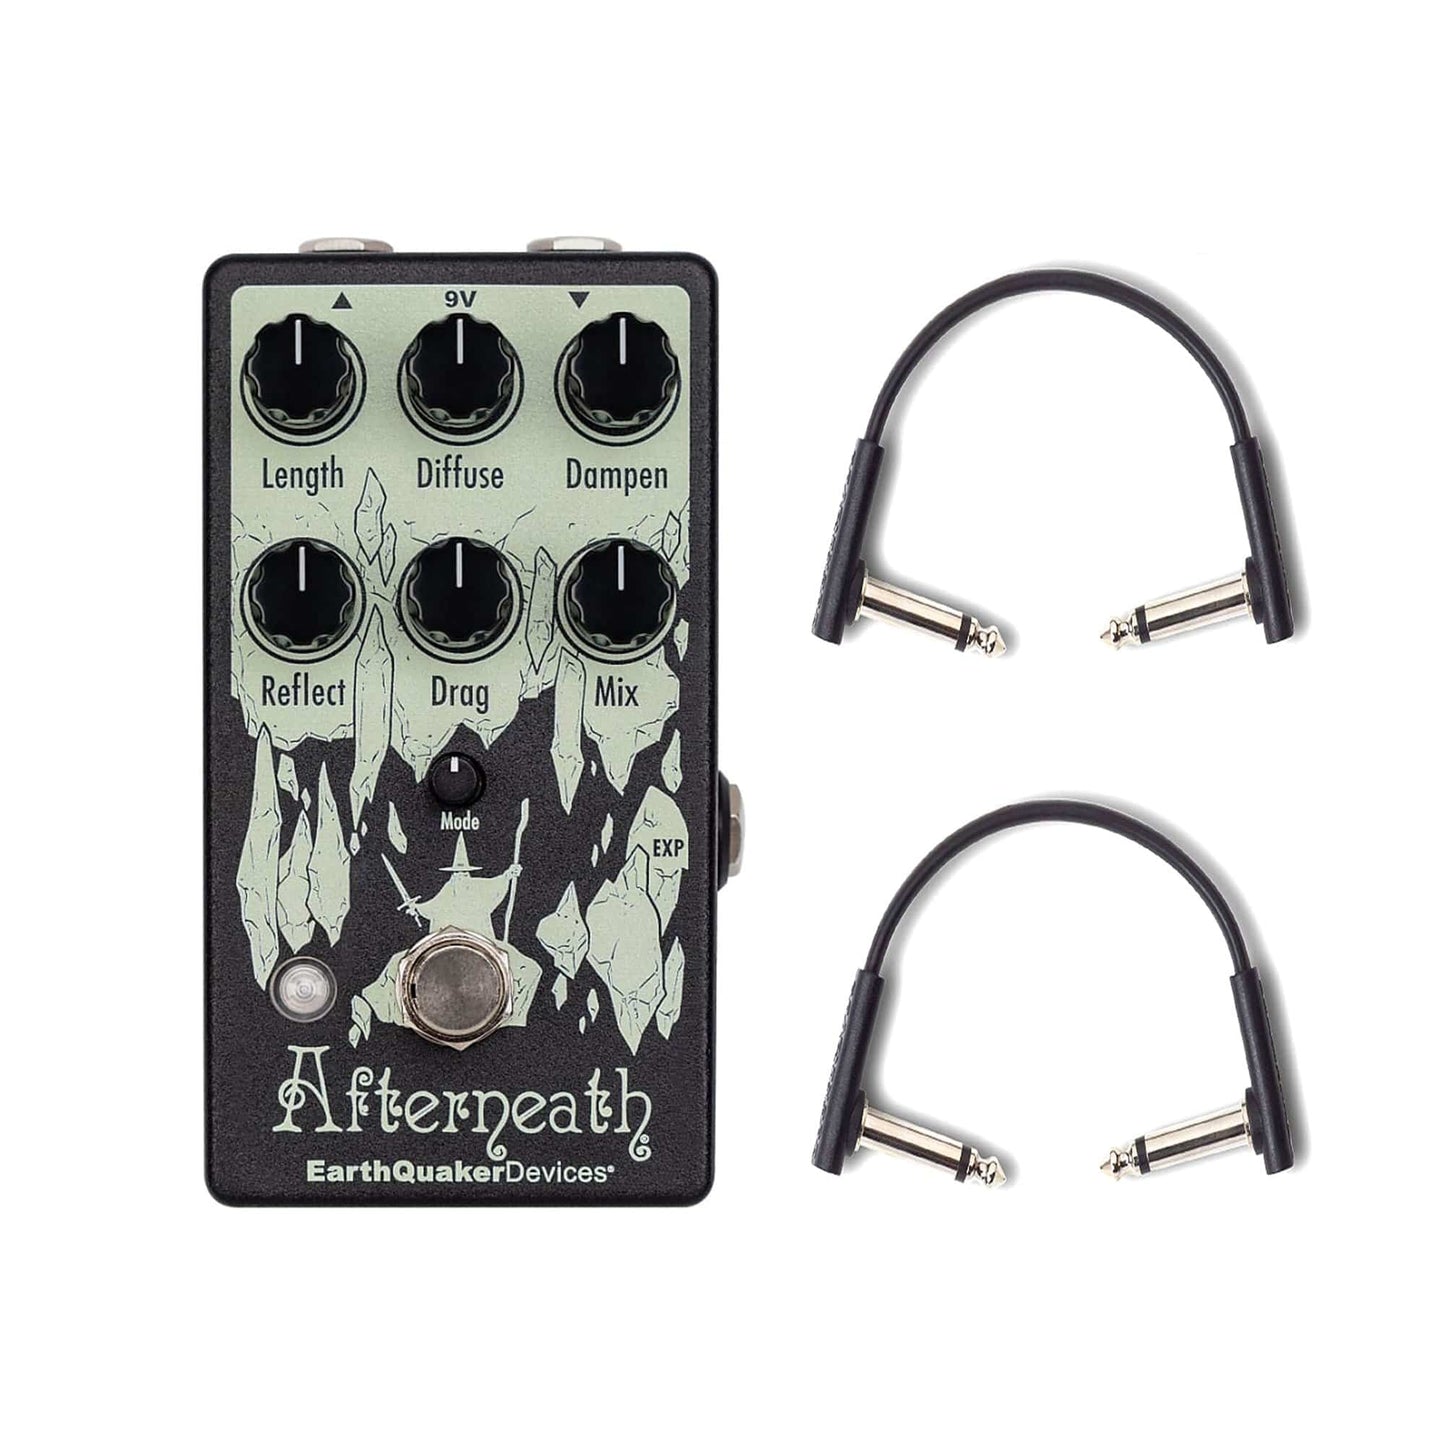 EarthQuaker Devices Afterneath V3 Enhanced Otherworldly Reverberation Machine w/(2) RockBoard Flat Patch Cables Bundle Effects and Pedals / Reverb